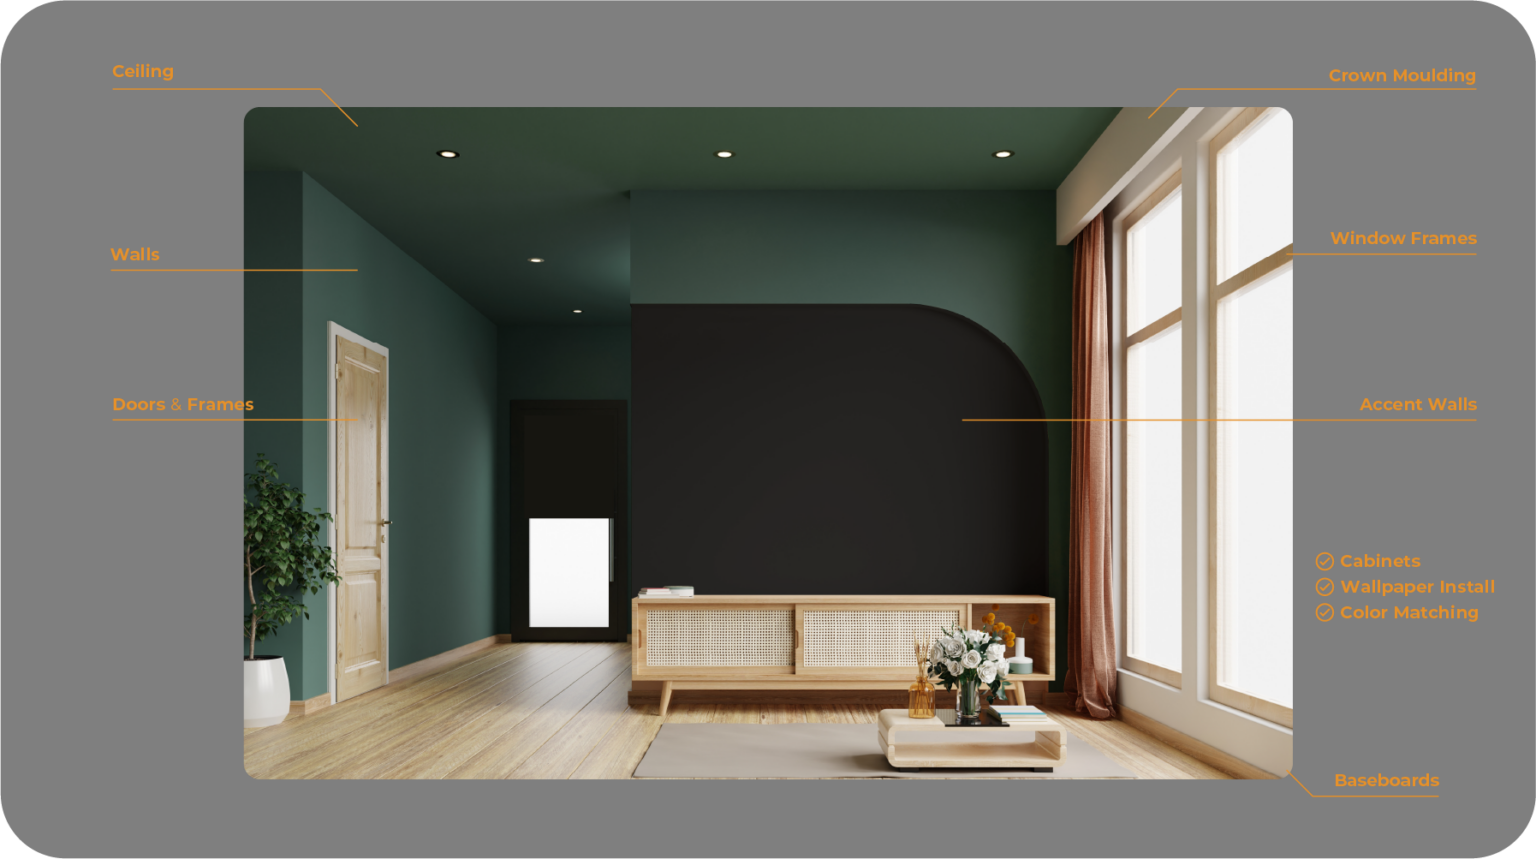 Room interior with callout text designating the areas that greenhaus paints: ceilings, walls, doors & frames, crown moulding, window frames, accent walls, baseboards, cabinets, and included services of wallpaper install and color matching